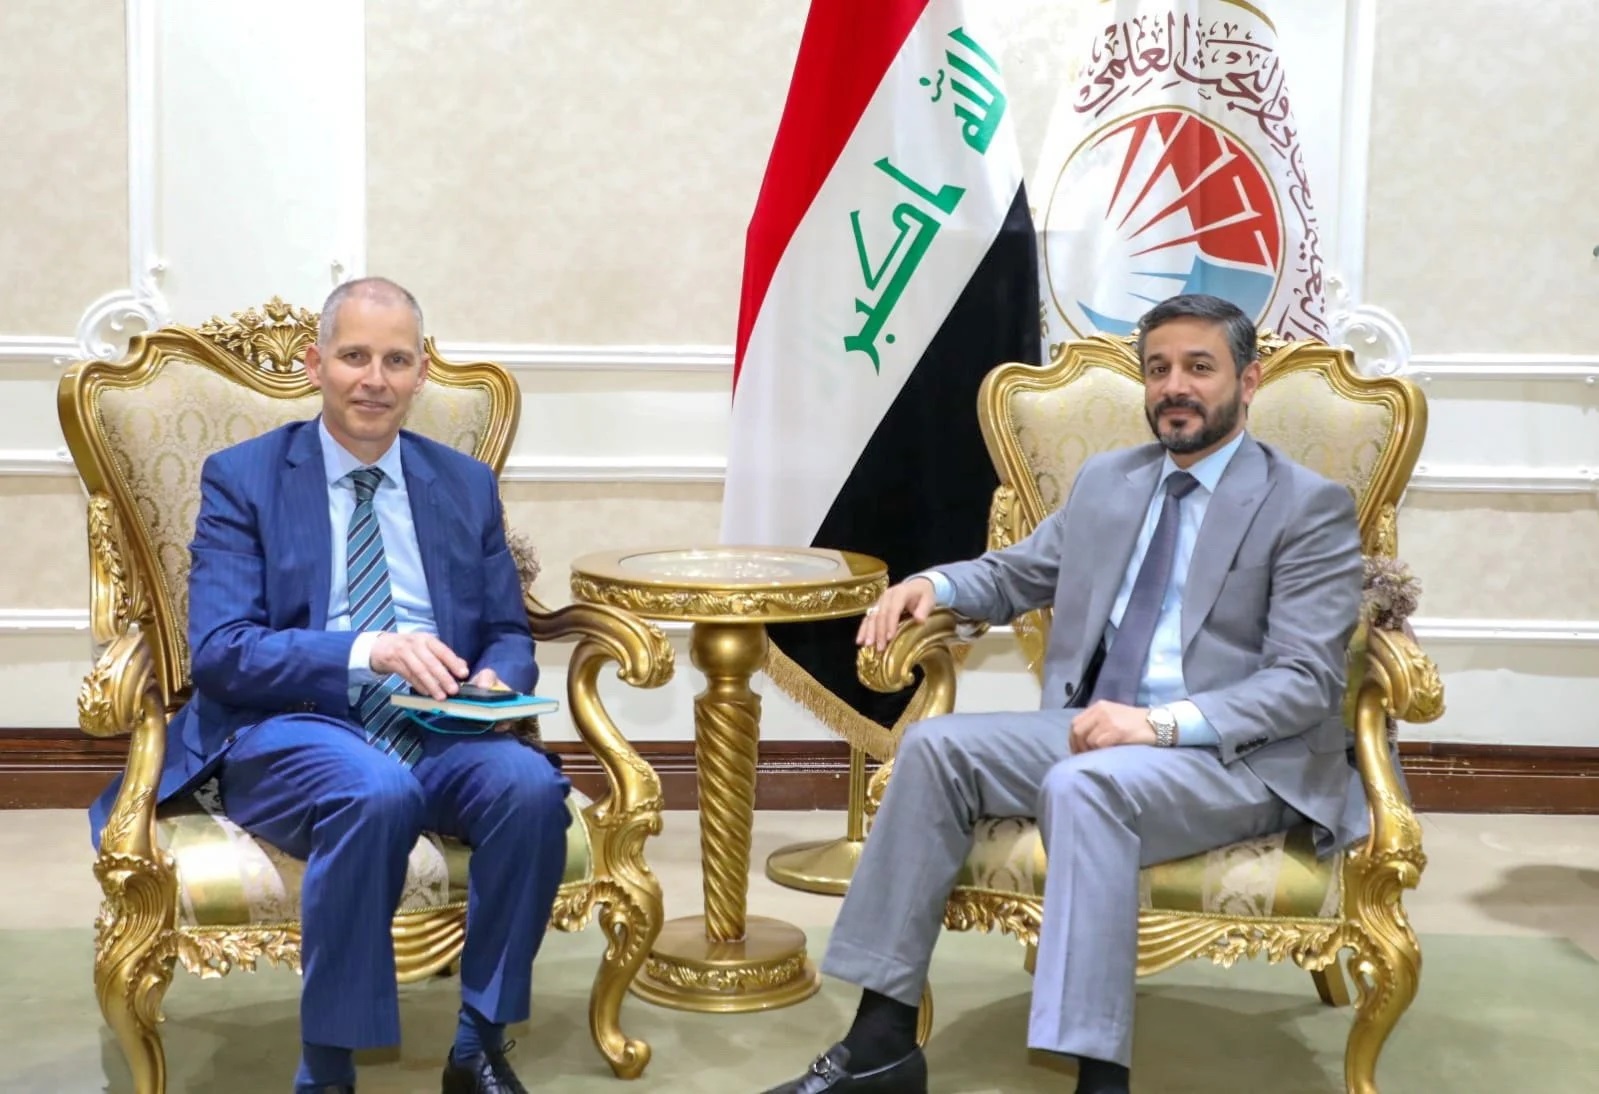 You are currently viewing Dr. Al-Aboudi Meets British Council’s Director in Iraq, His Excellency Reviews Training & Development Programs with Universities